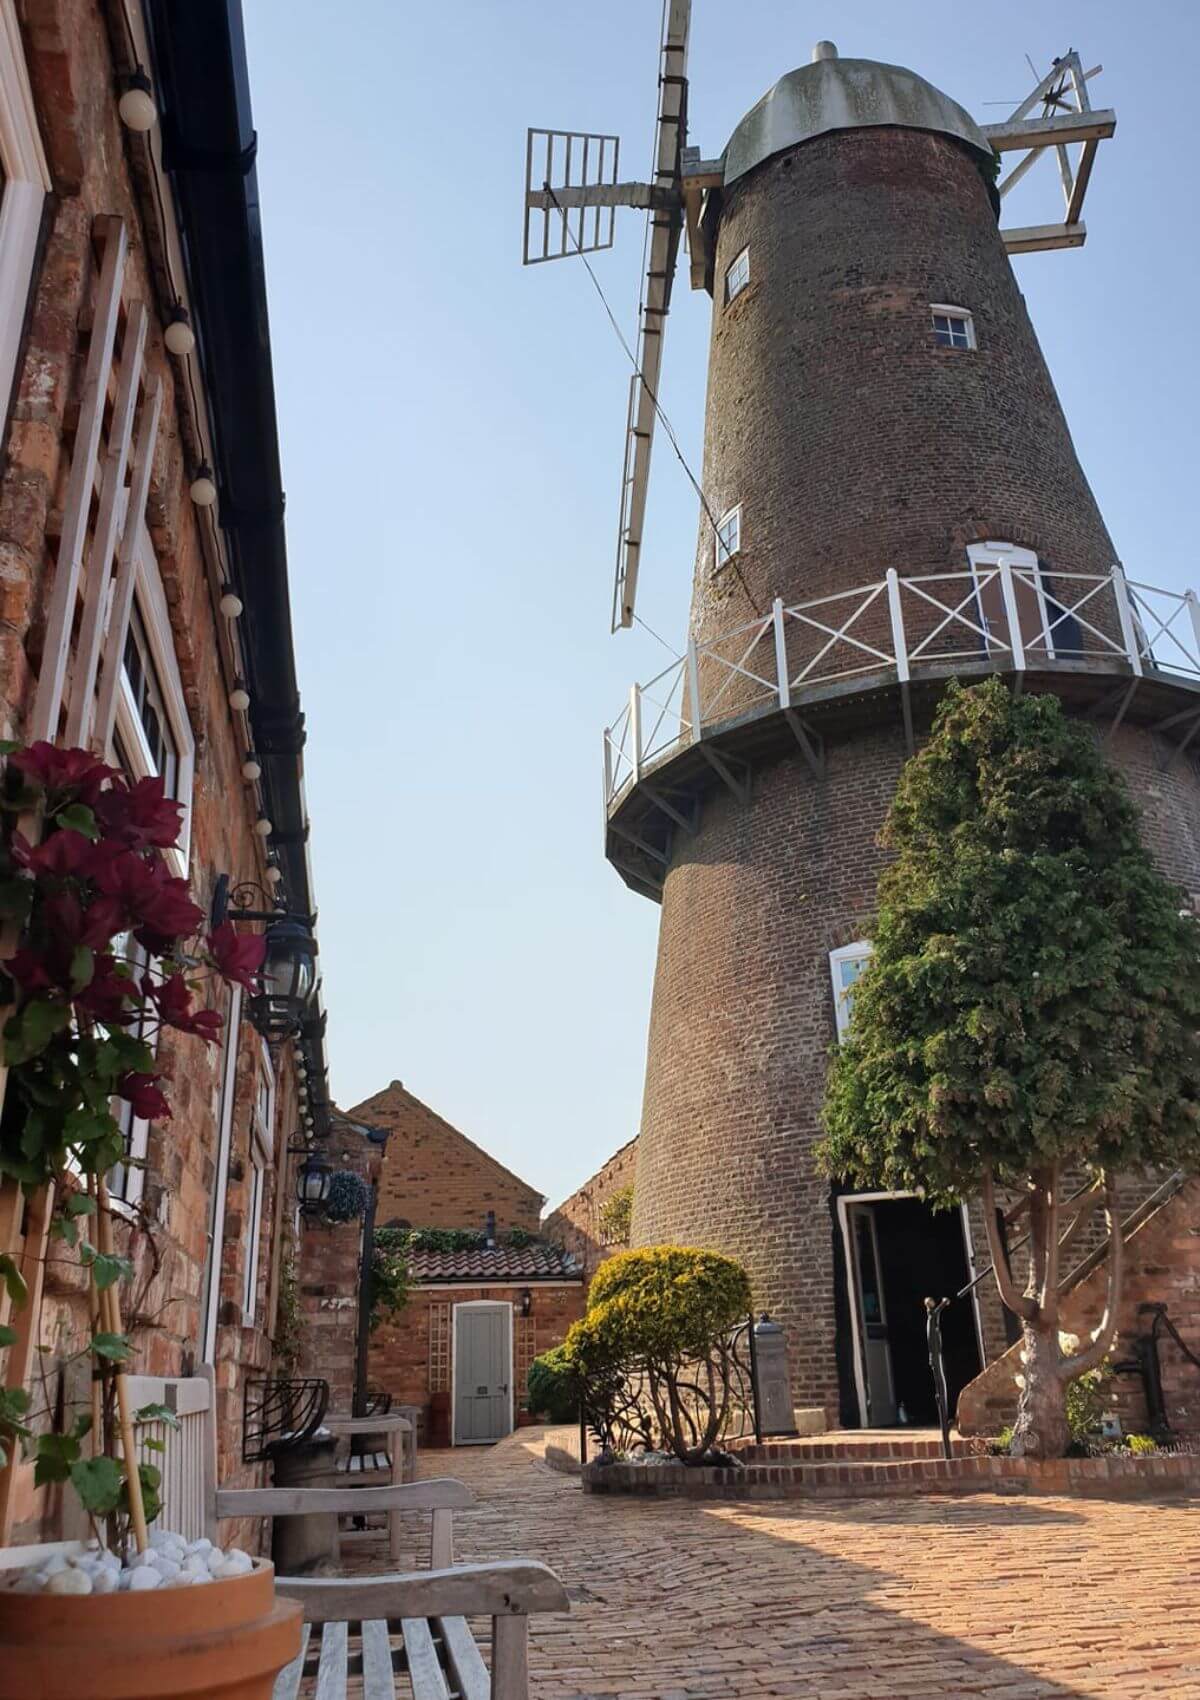 The Windmill in Scarborough is one of the most unusual places to stay in Yorkshire